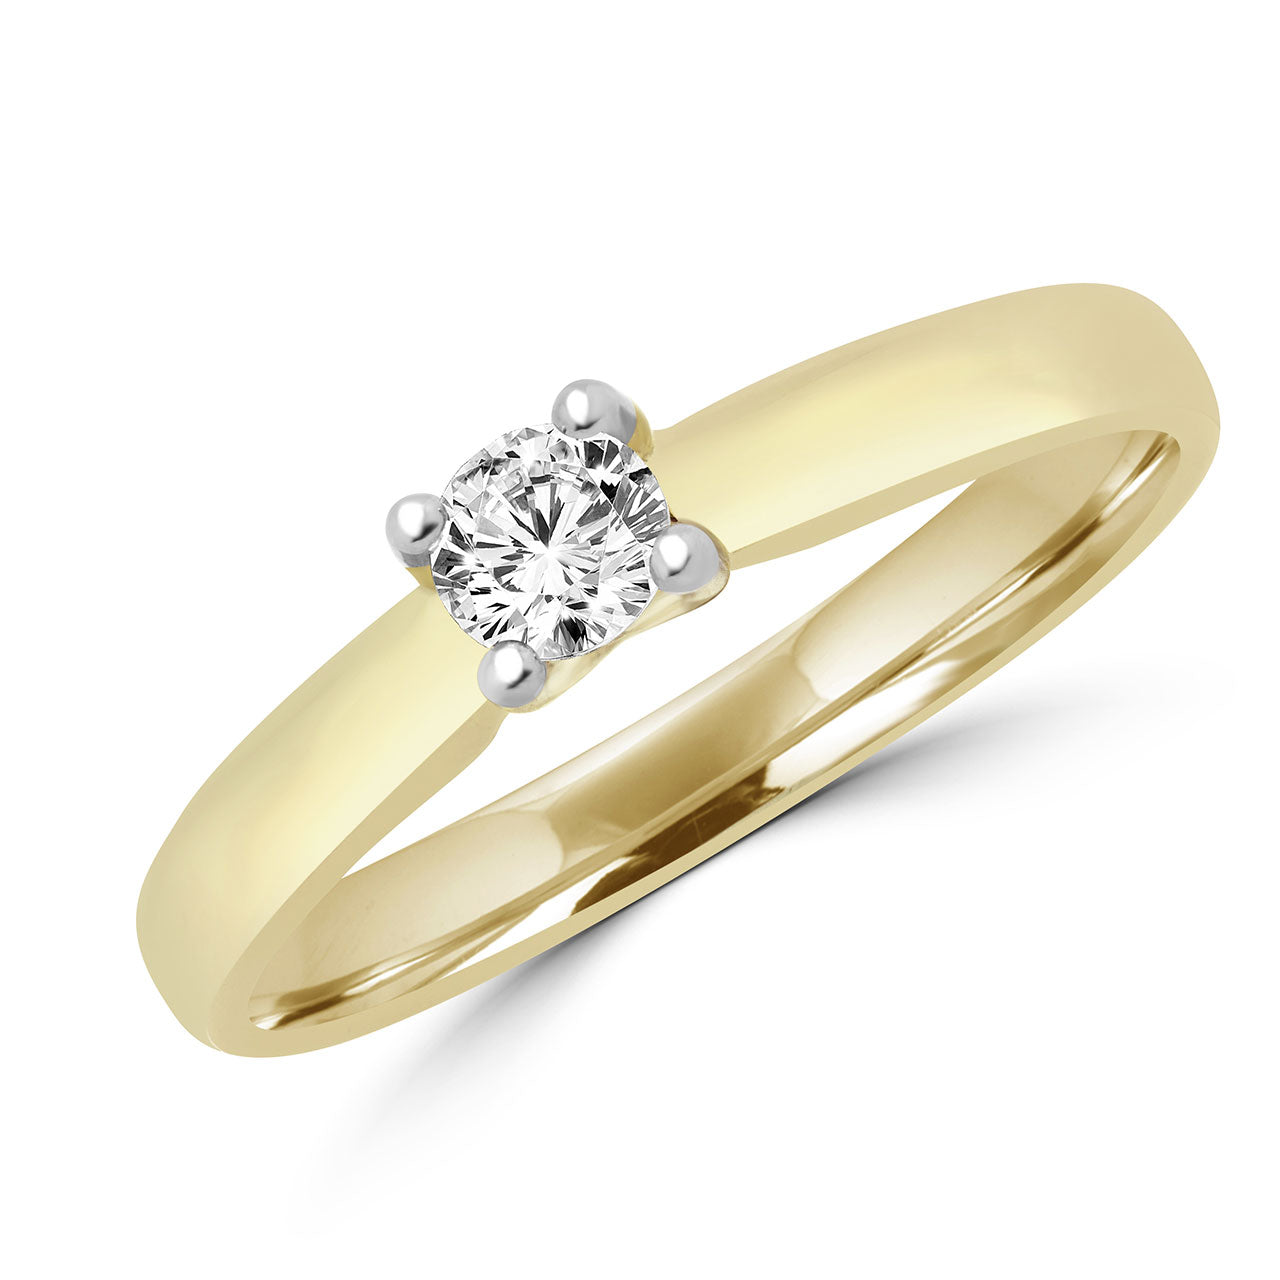 Elegant solitaire engagement ring in 10k yellow gold